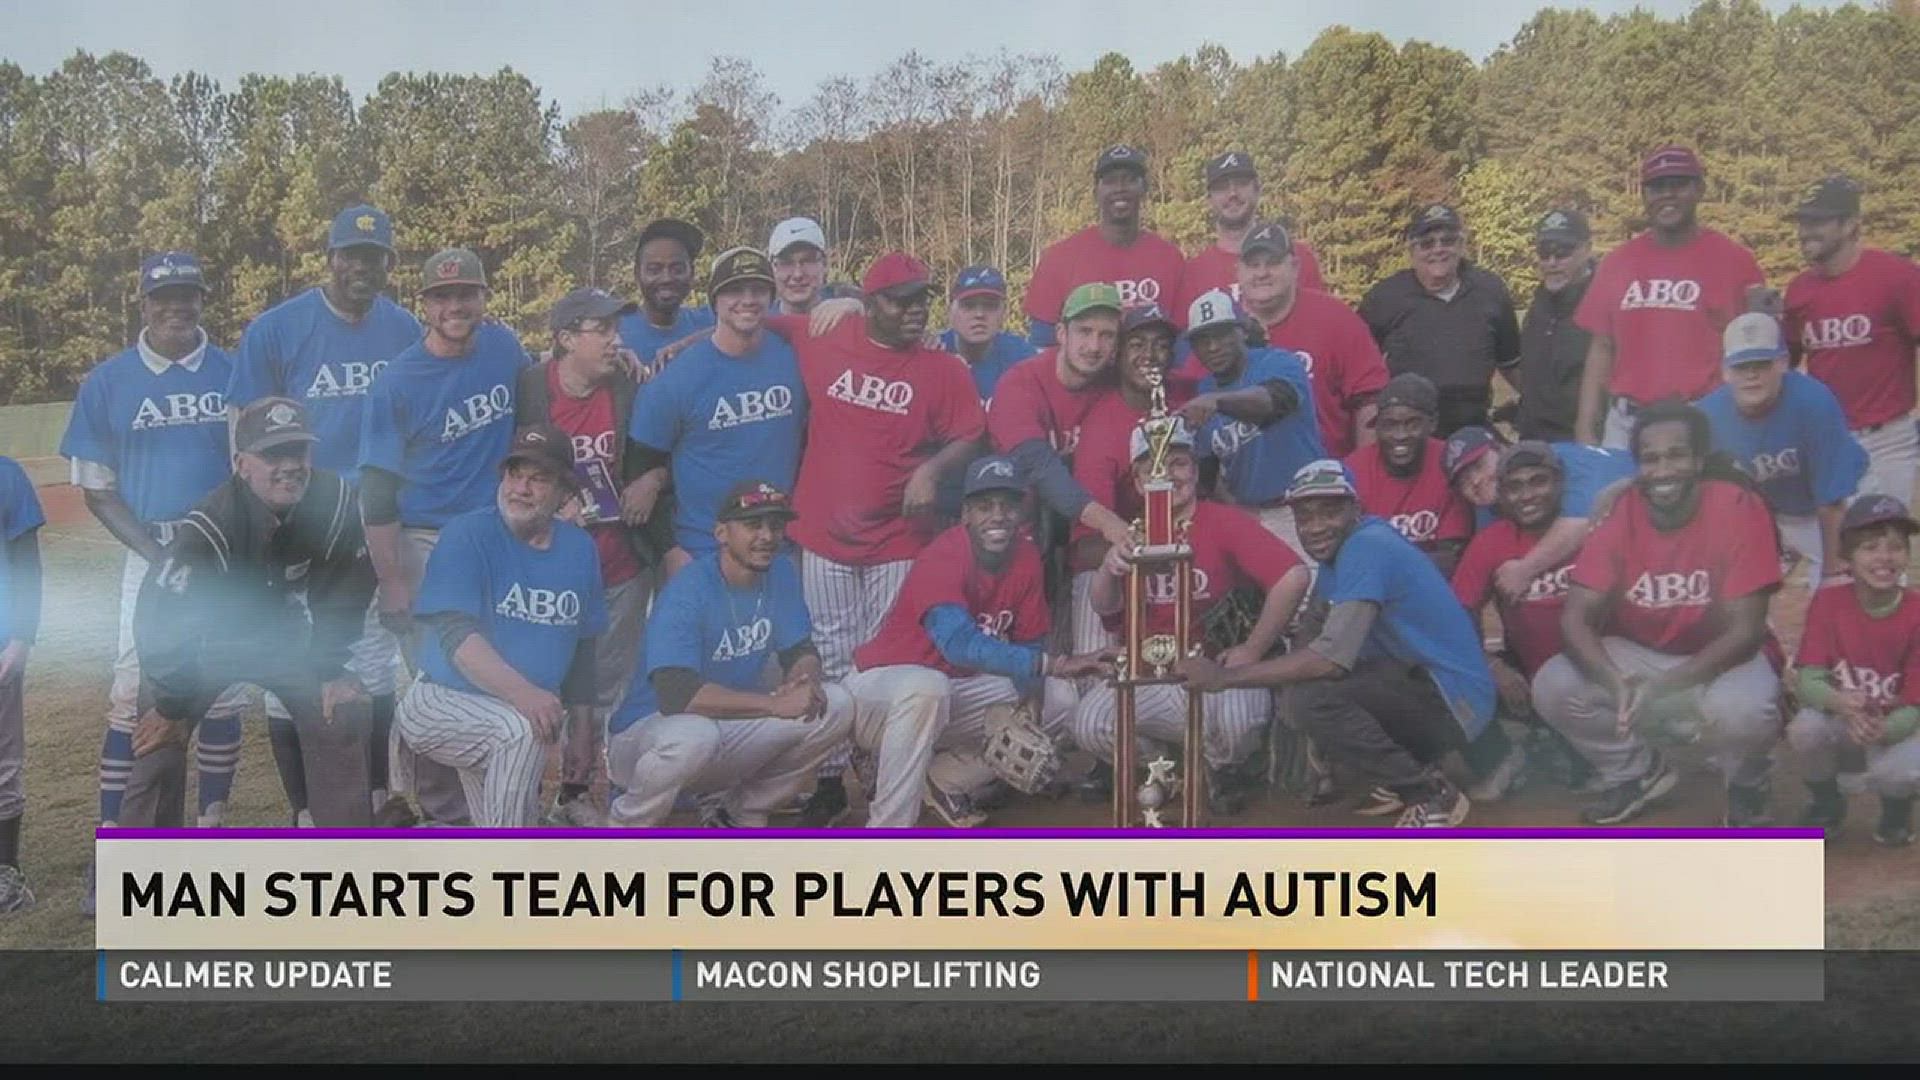 Man starts team for players with autism